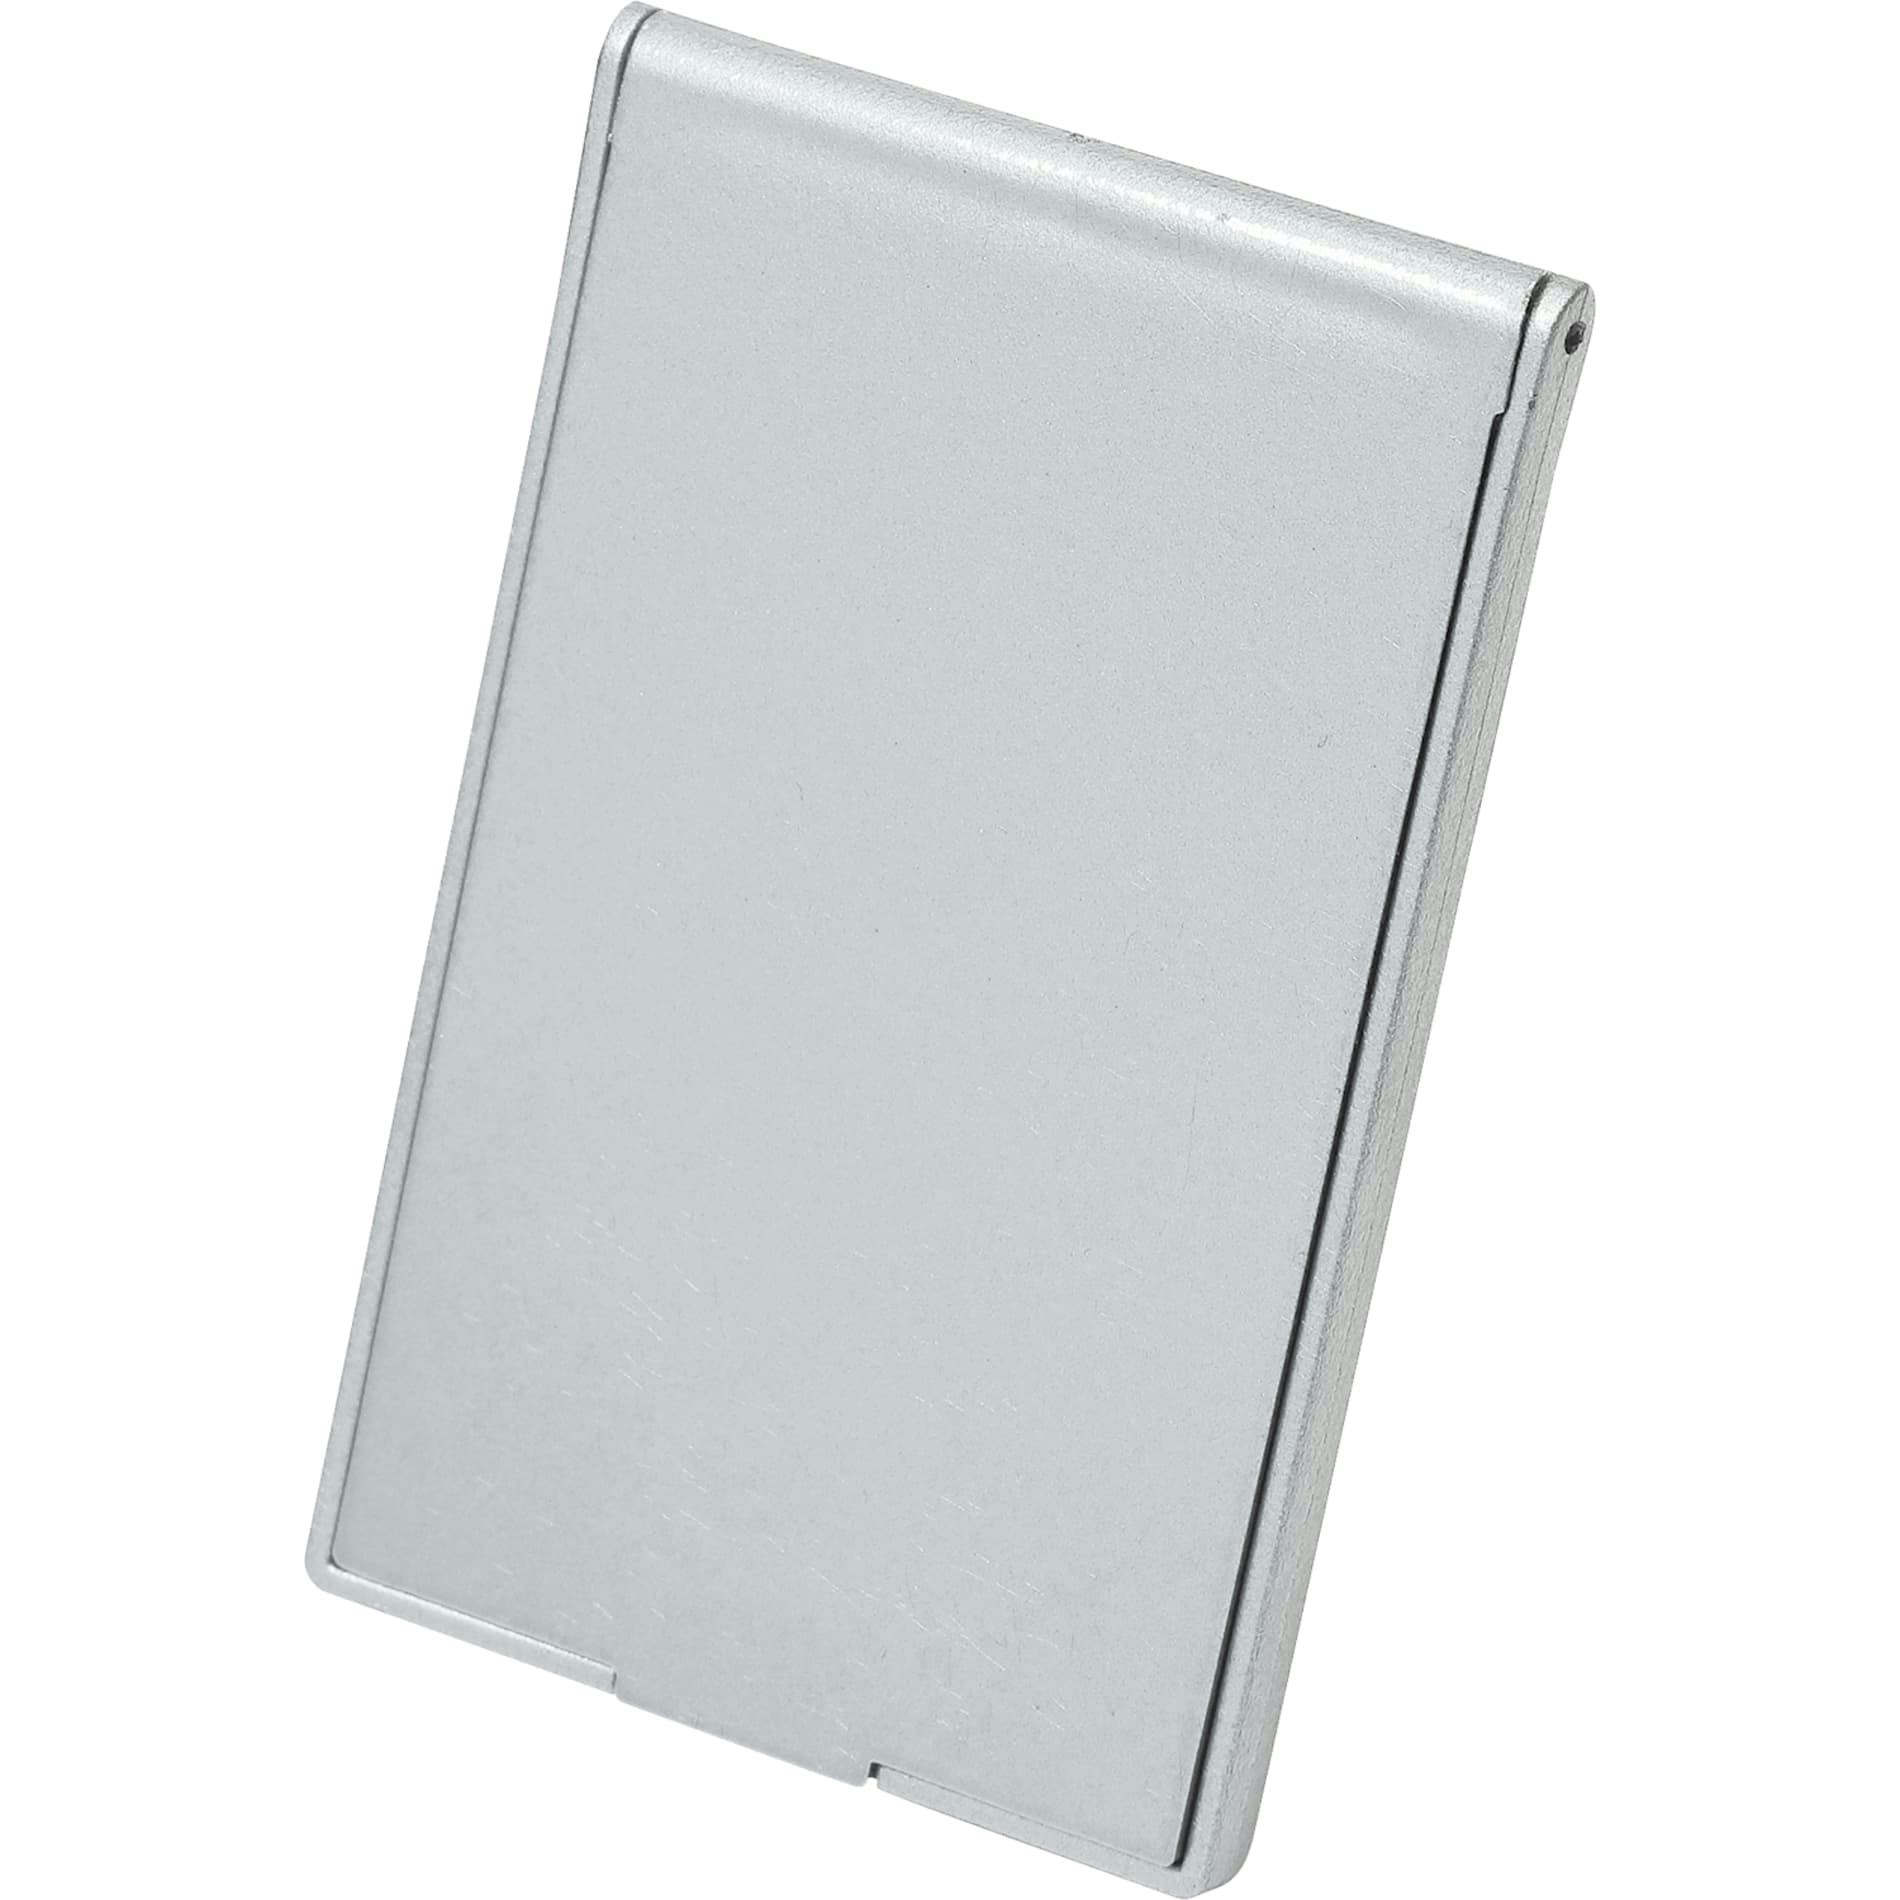 Stand-Up Pocket Mirror - additional Image 1